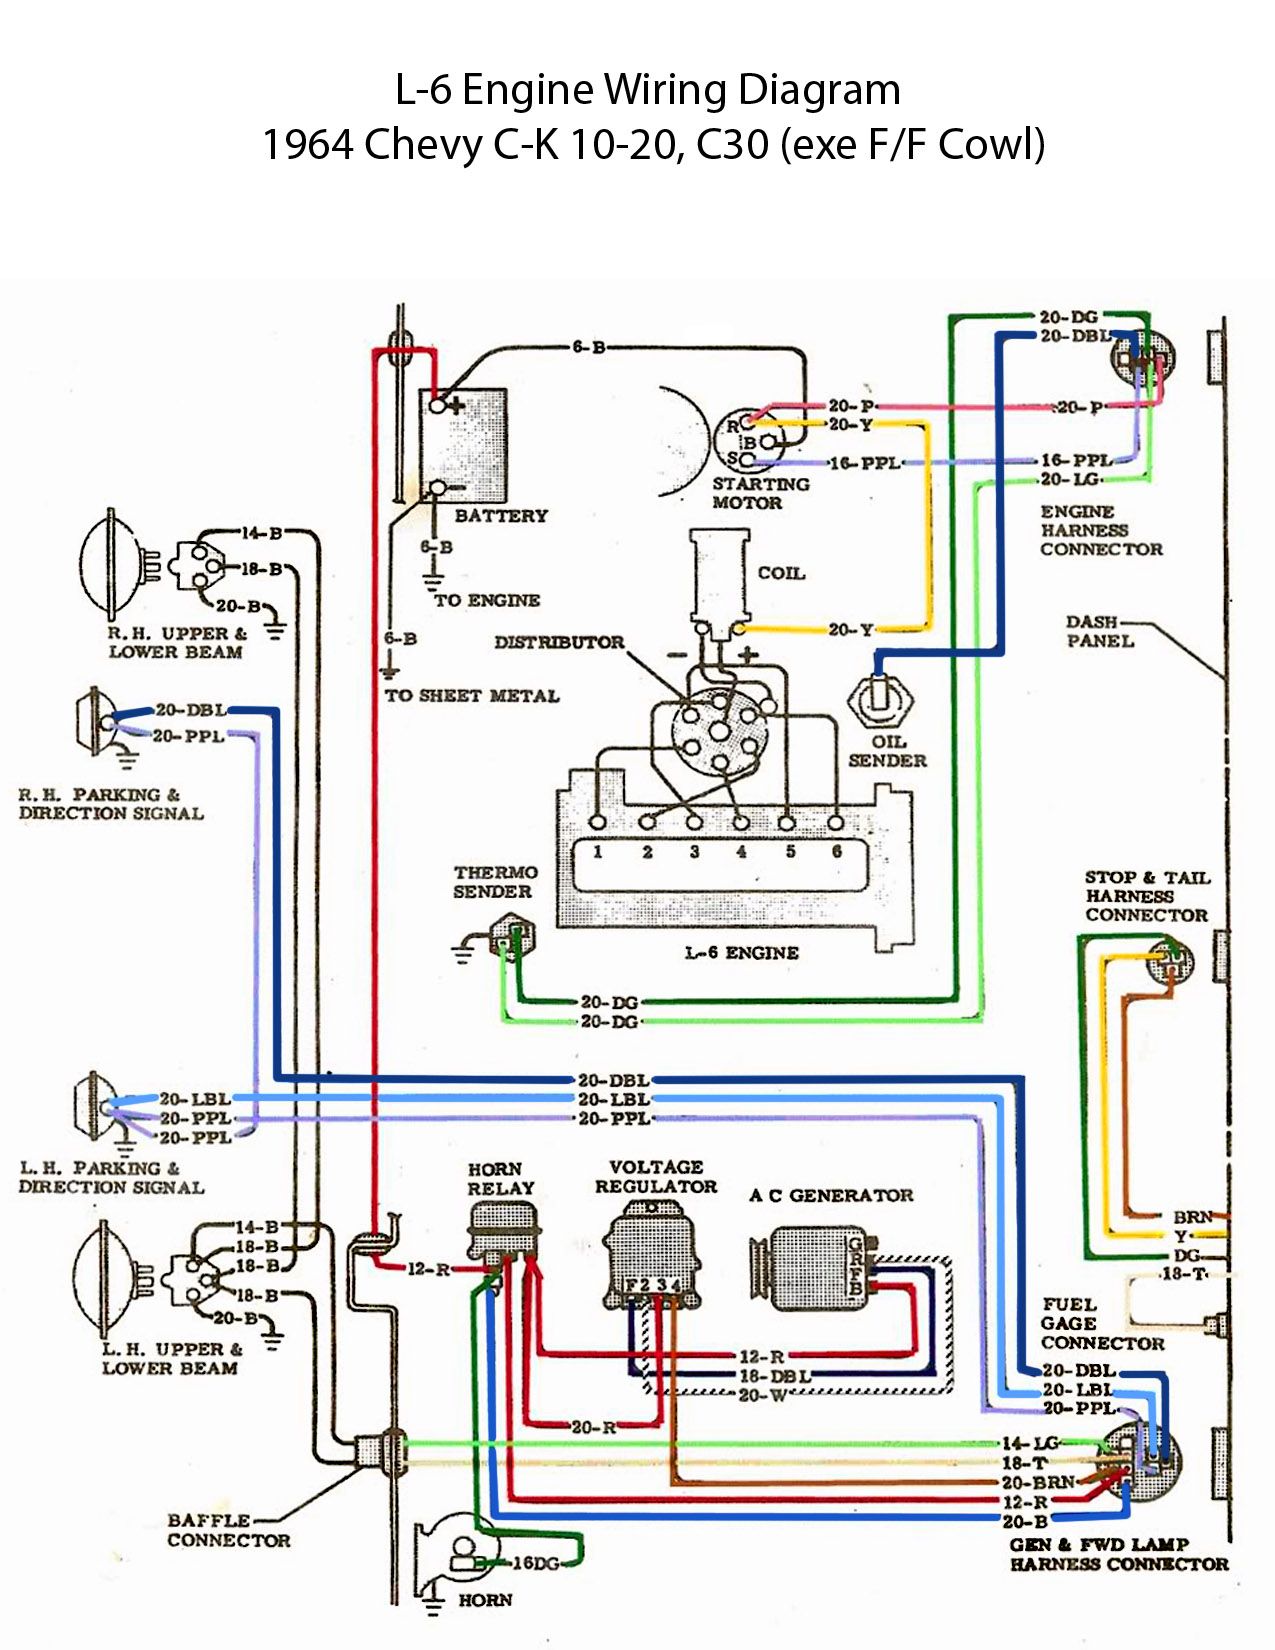 color coded wiring diagram for the predator 670cc pdf